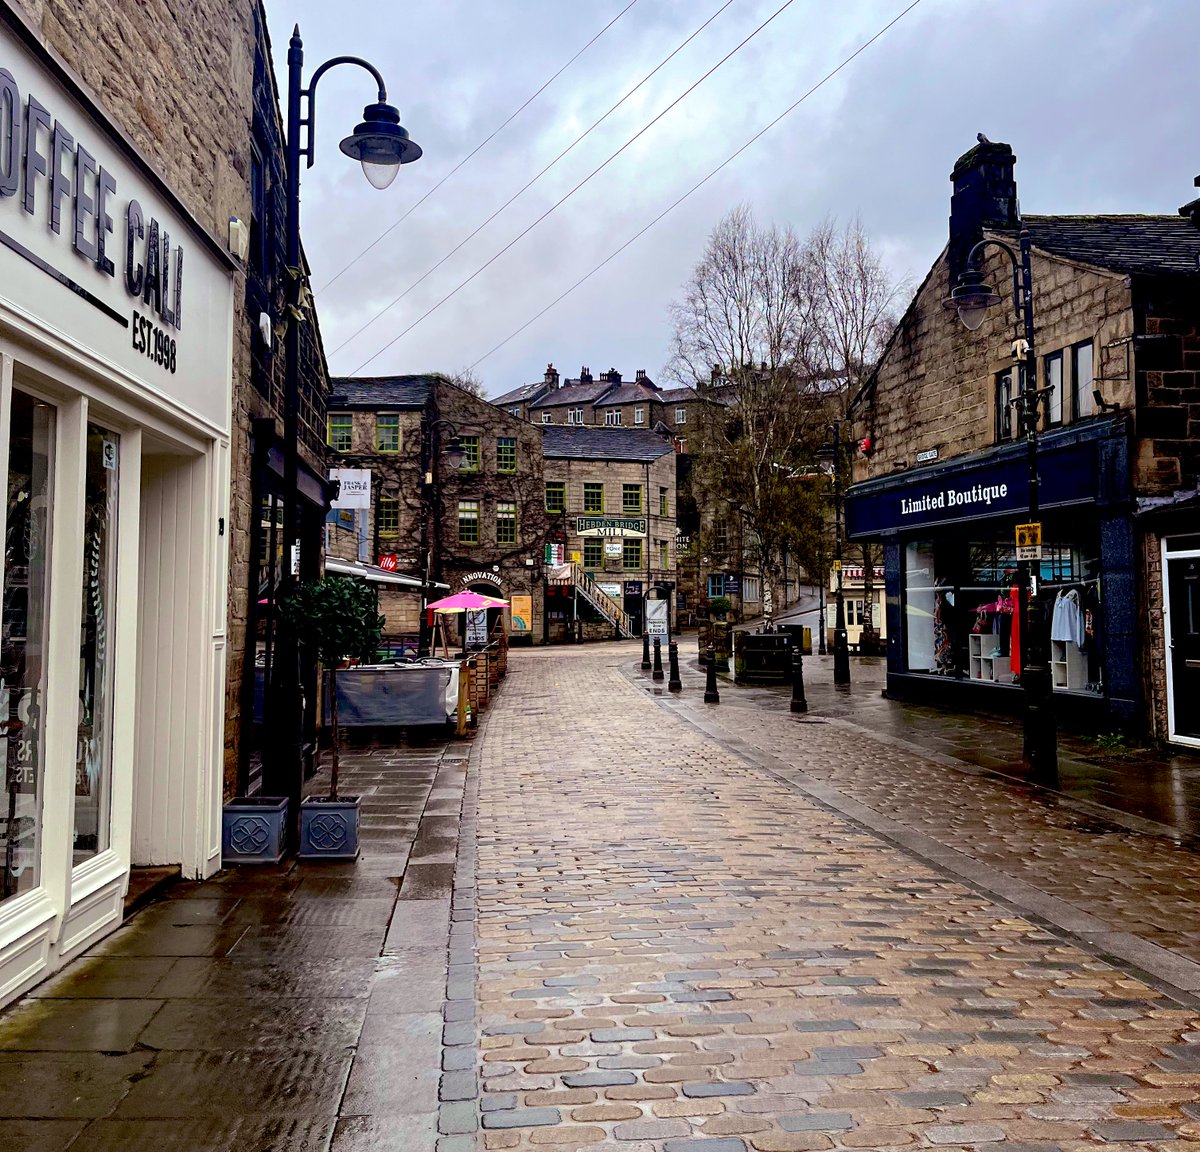 Another day exploring the beautiful Hebden Bridge region. We have it all to ourselves mind thanks to the weather. 🌧️👍🏻